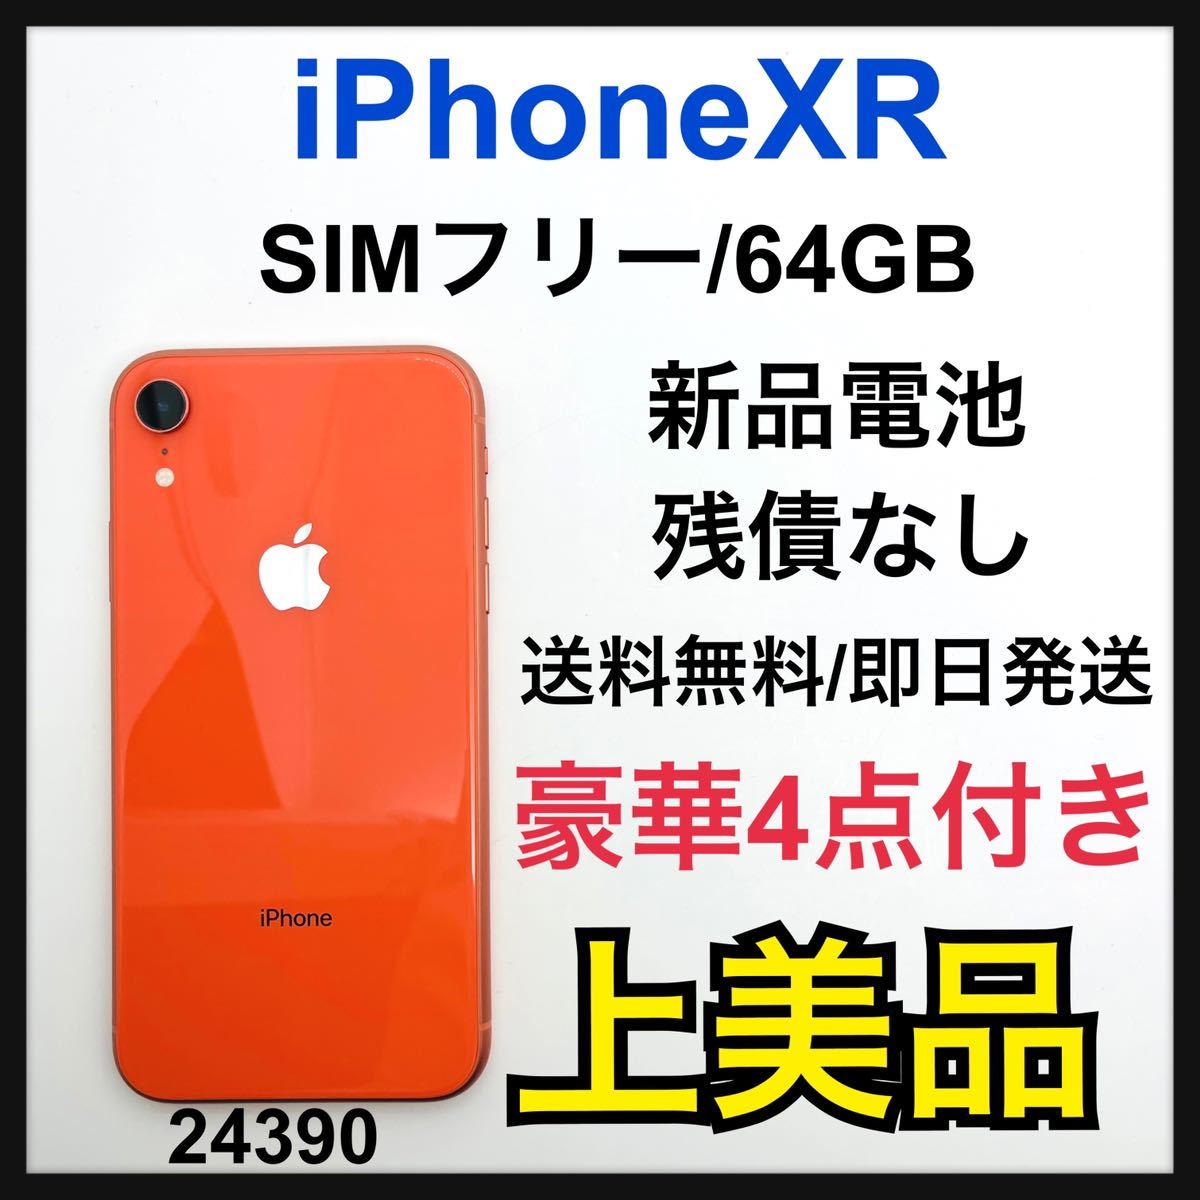 A 新品電池 iPhone XR Coral 64 GB SIMフリー 本体 connectedfire.com